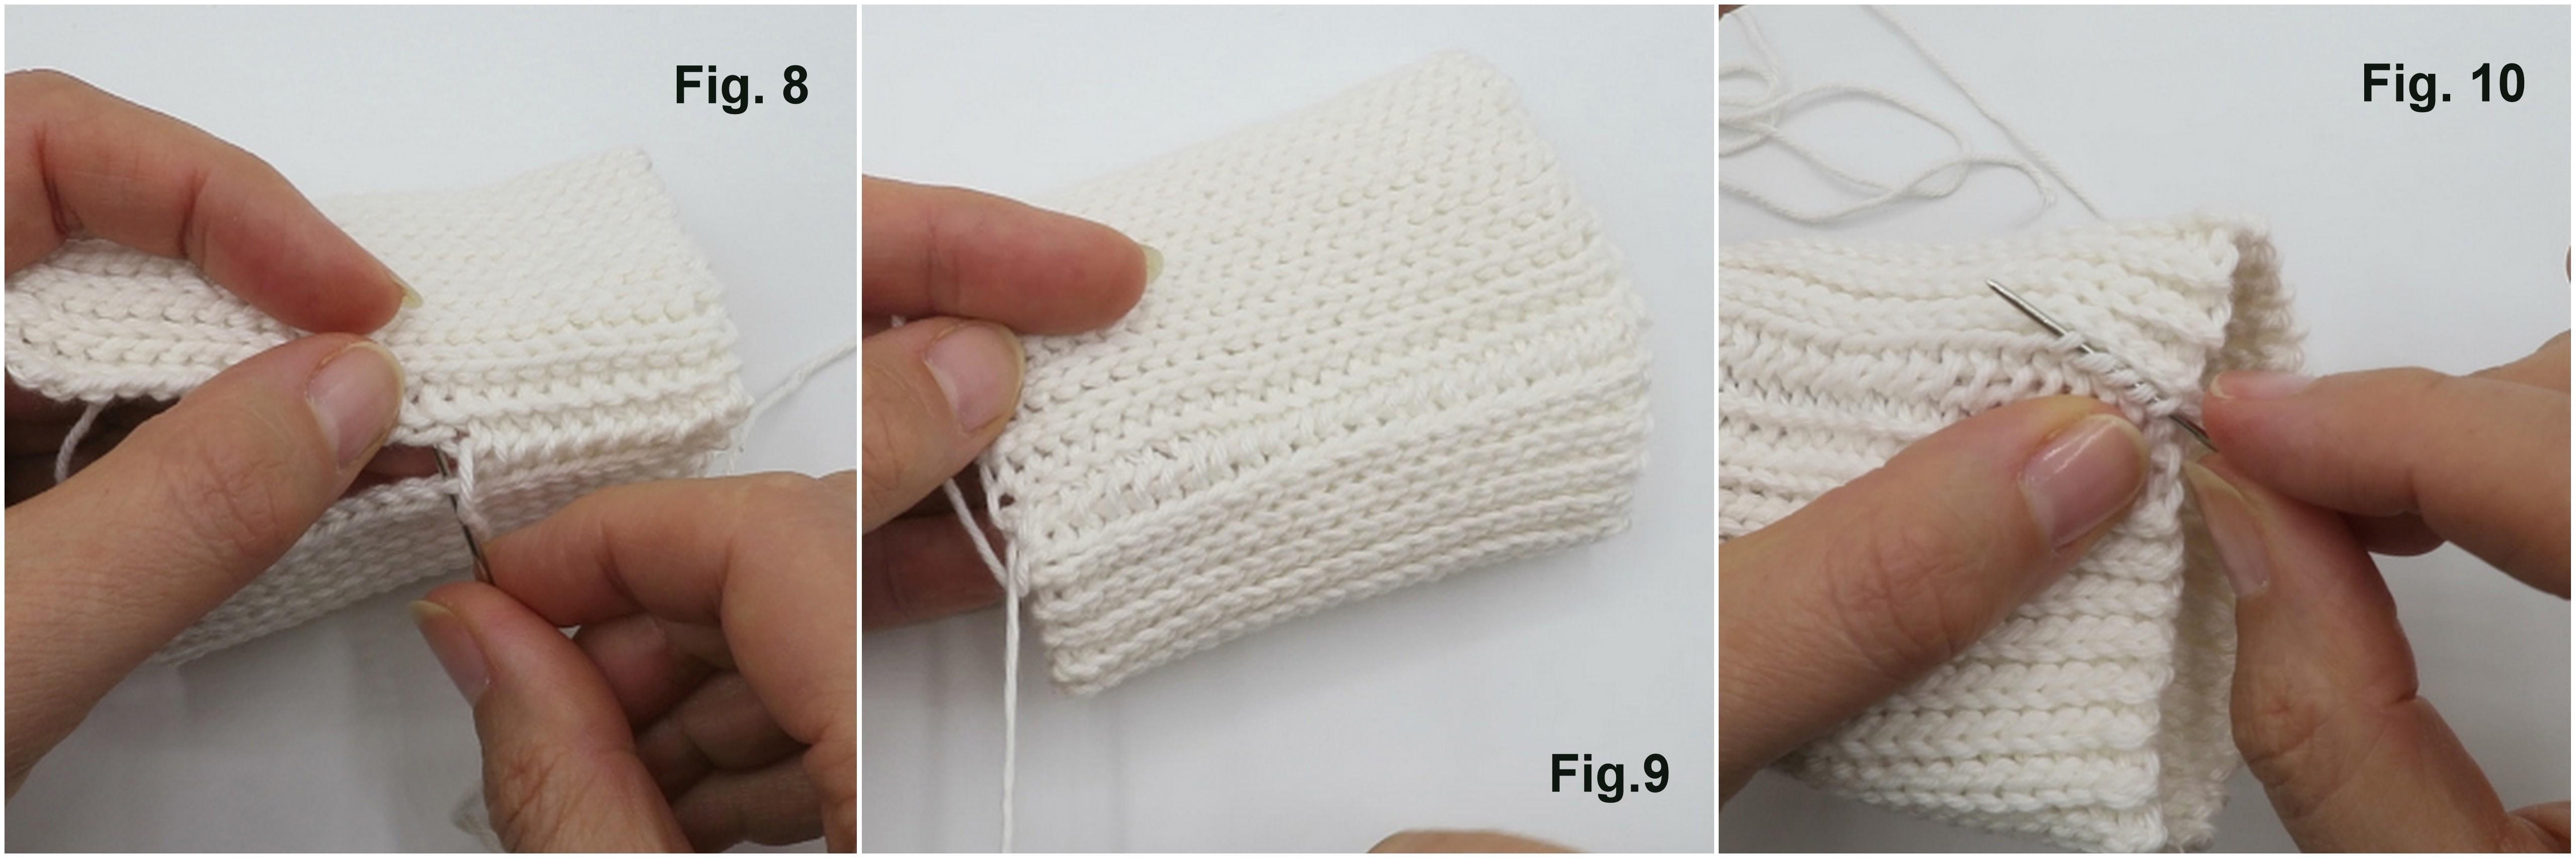 a series if 3 images showing the gathering of a white cotton sleeve with blue tacking stitch in preparation for sewing on a stretch rib crochet cuff